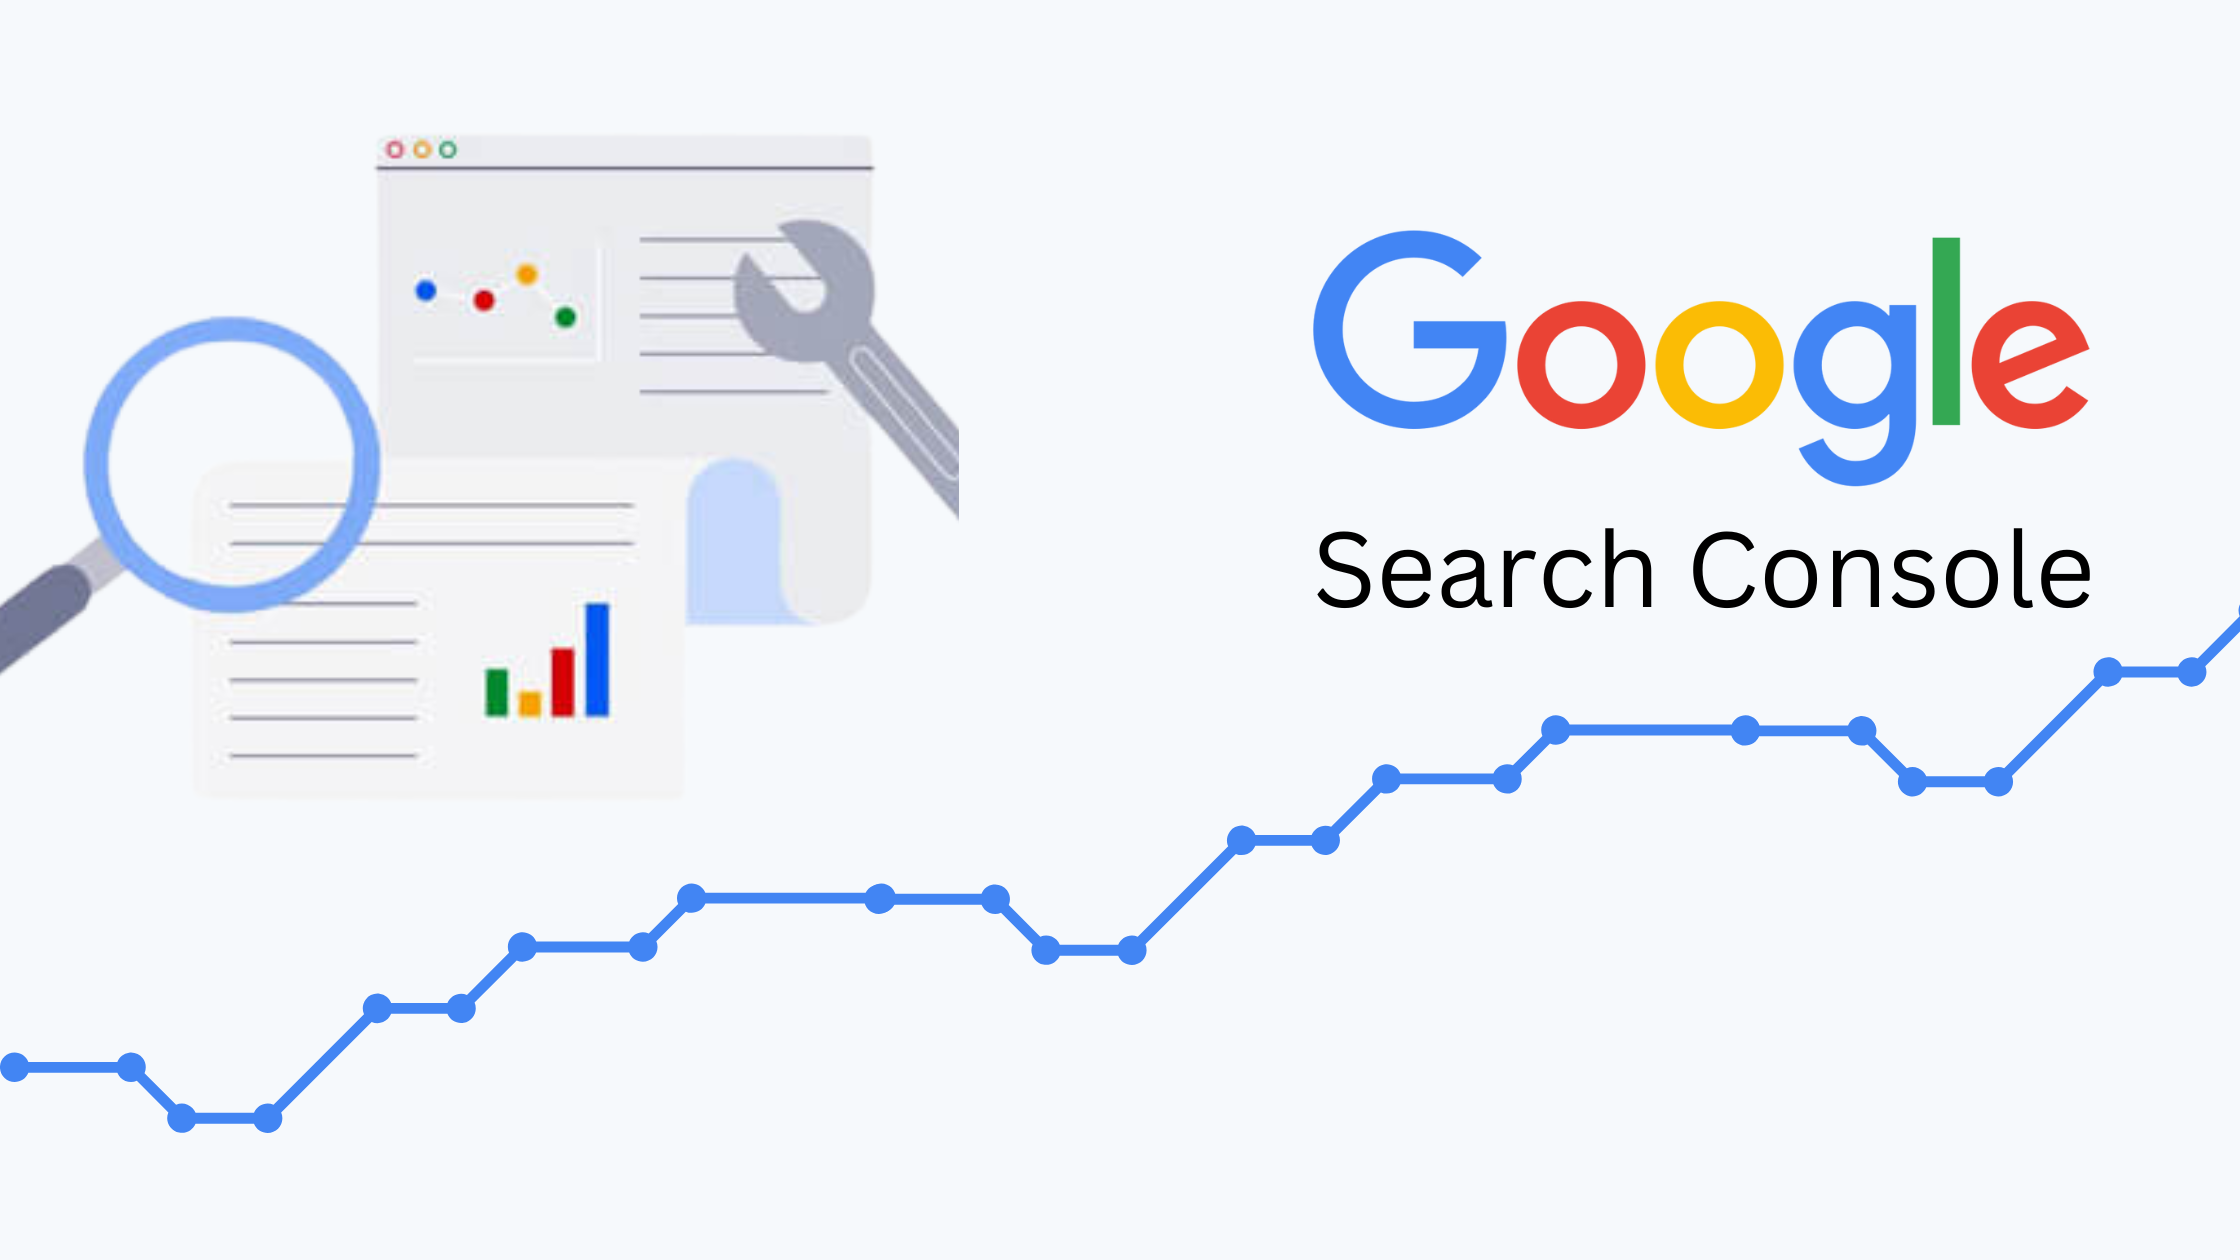 How does Google Search Console help you boost your Google ranking